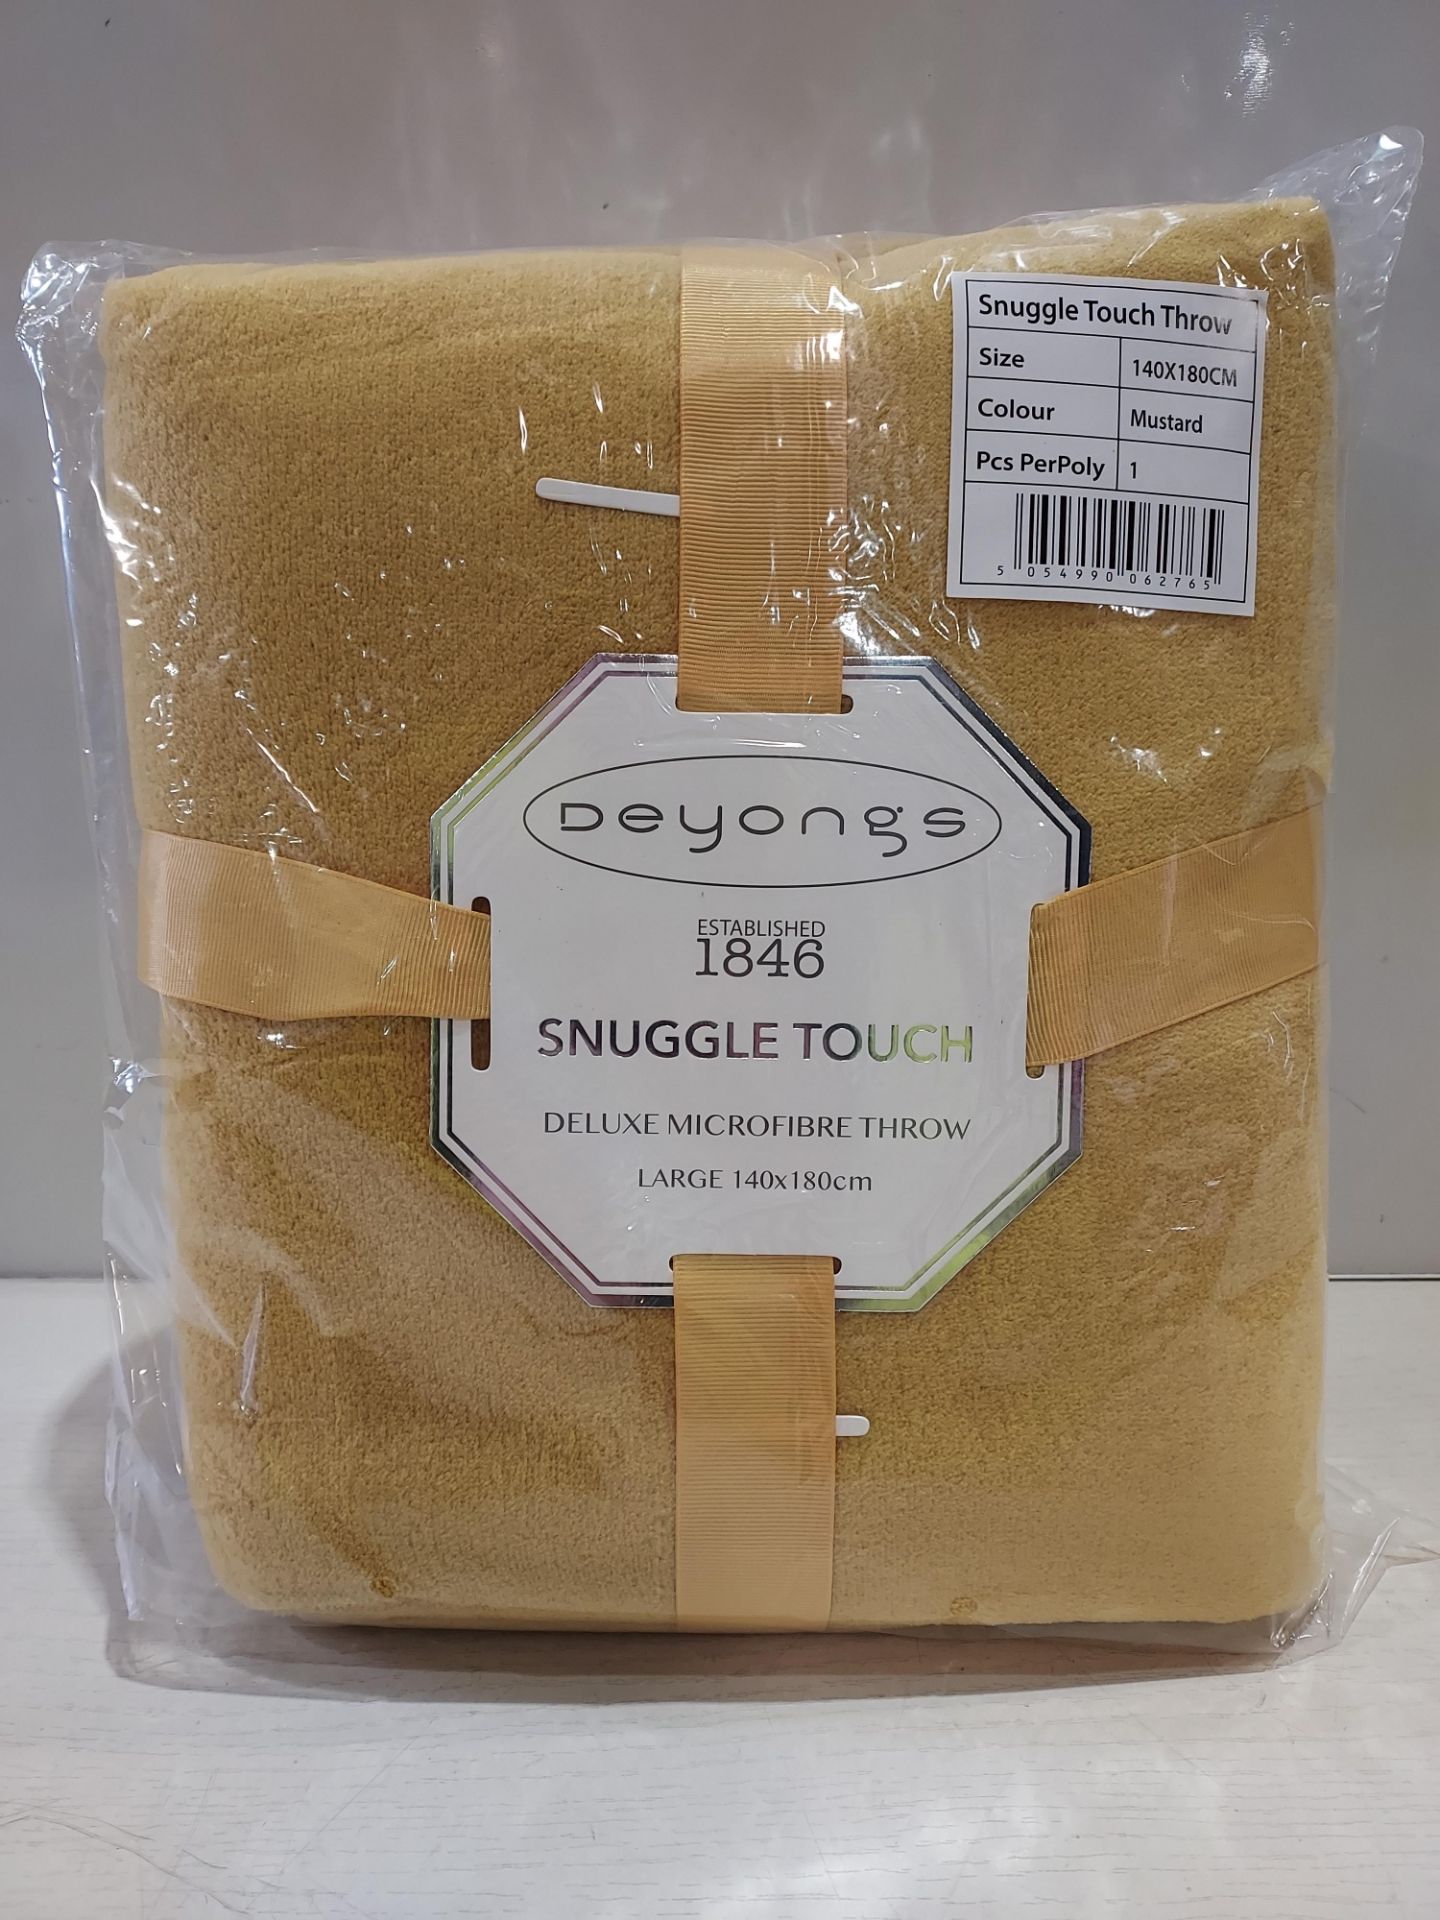 24 X BRAND NEW DEYONGS SNUGGLE TOUCH DELUXE MICROFIBRE THROWS - IN MUSTARD COLOUR (140 X 180